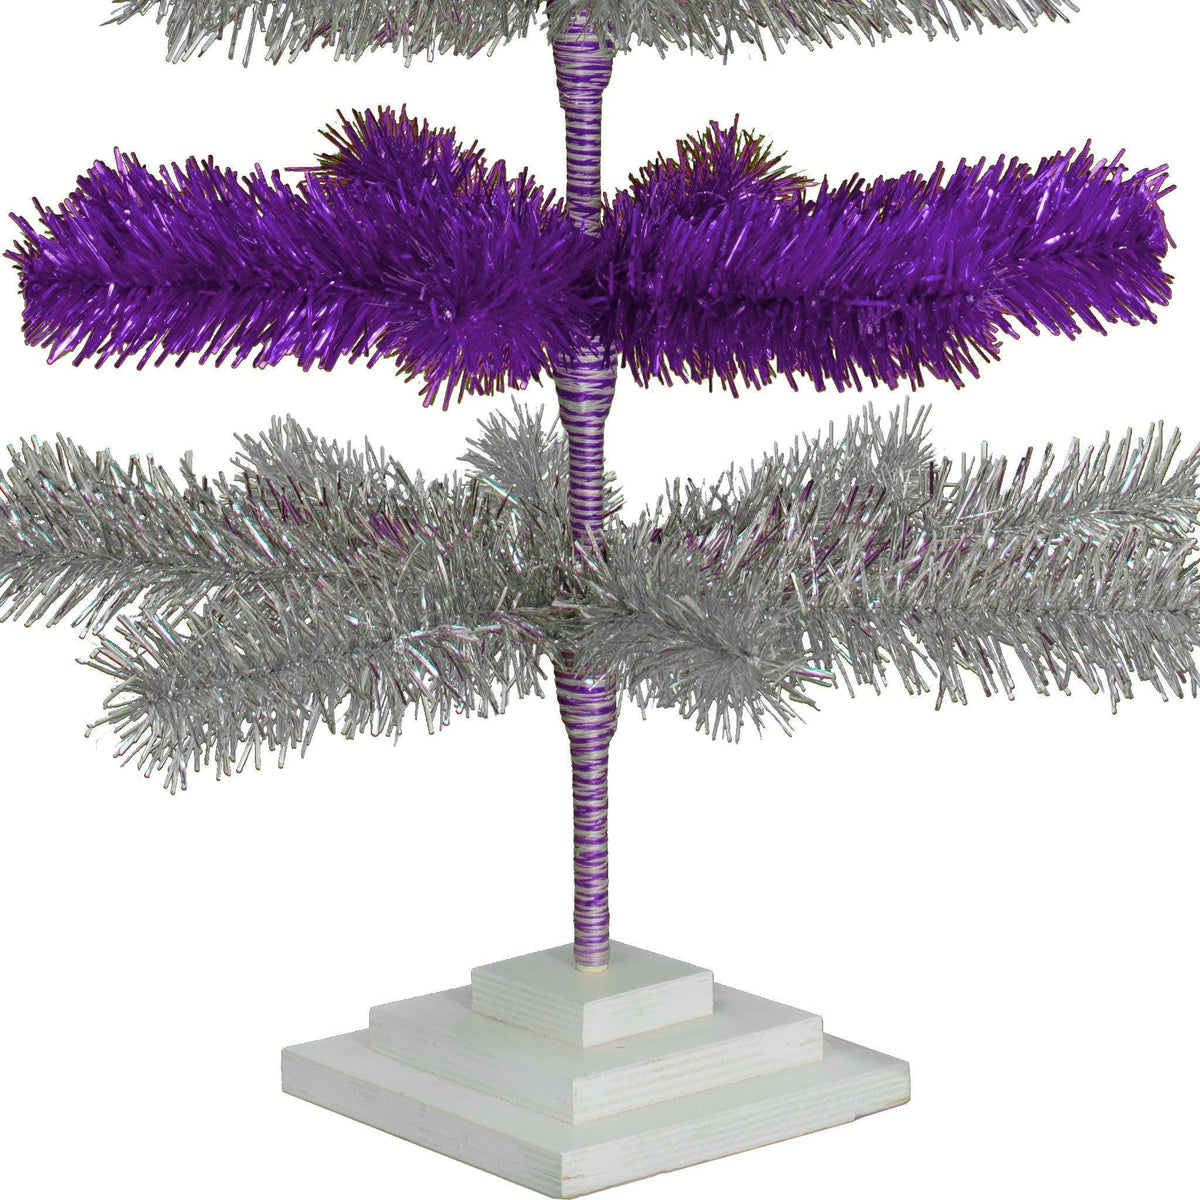 48in Tall Purple & Silver Layered Tinsel Christmas Trees! Decorate for the holidays with a Shiny Purple and Metallic Silver retro-style Christmas Tree. On sale now at leedisplay.com